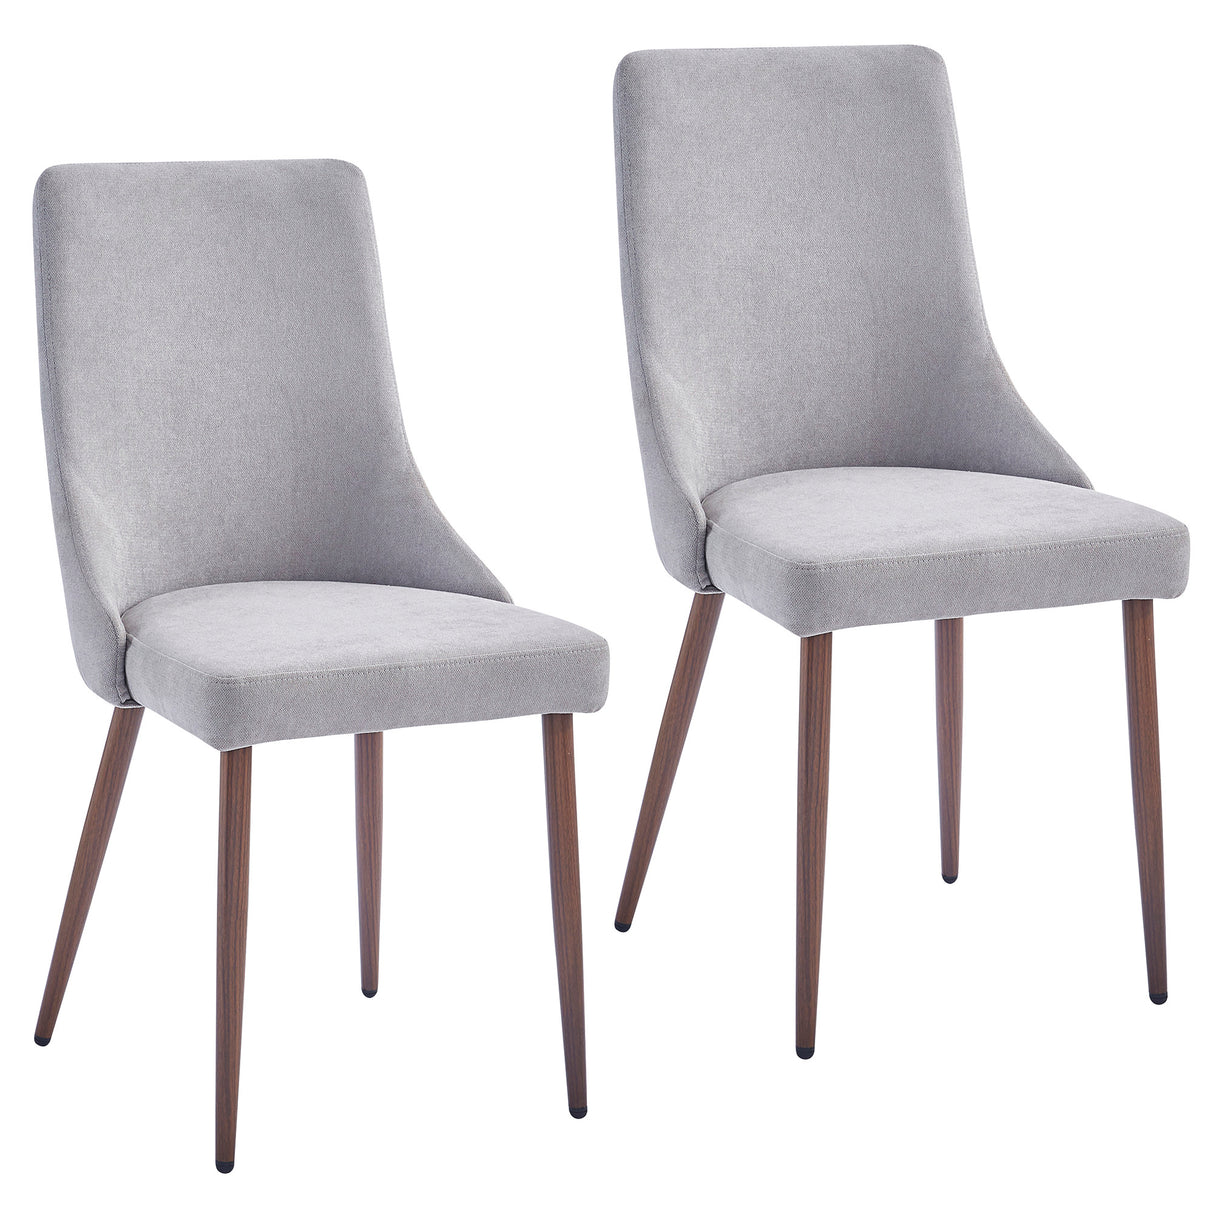 Cora Side Chair Fabric Grey (Set of 2)